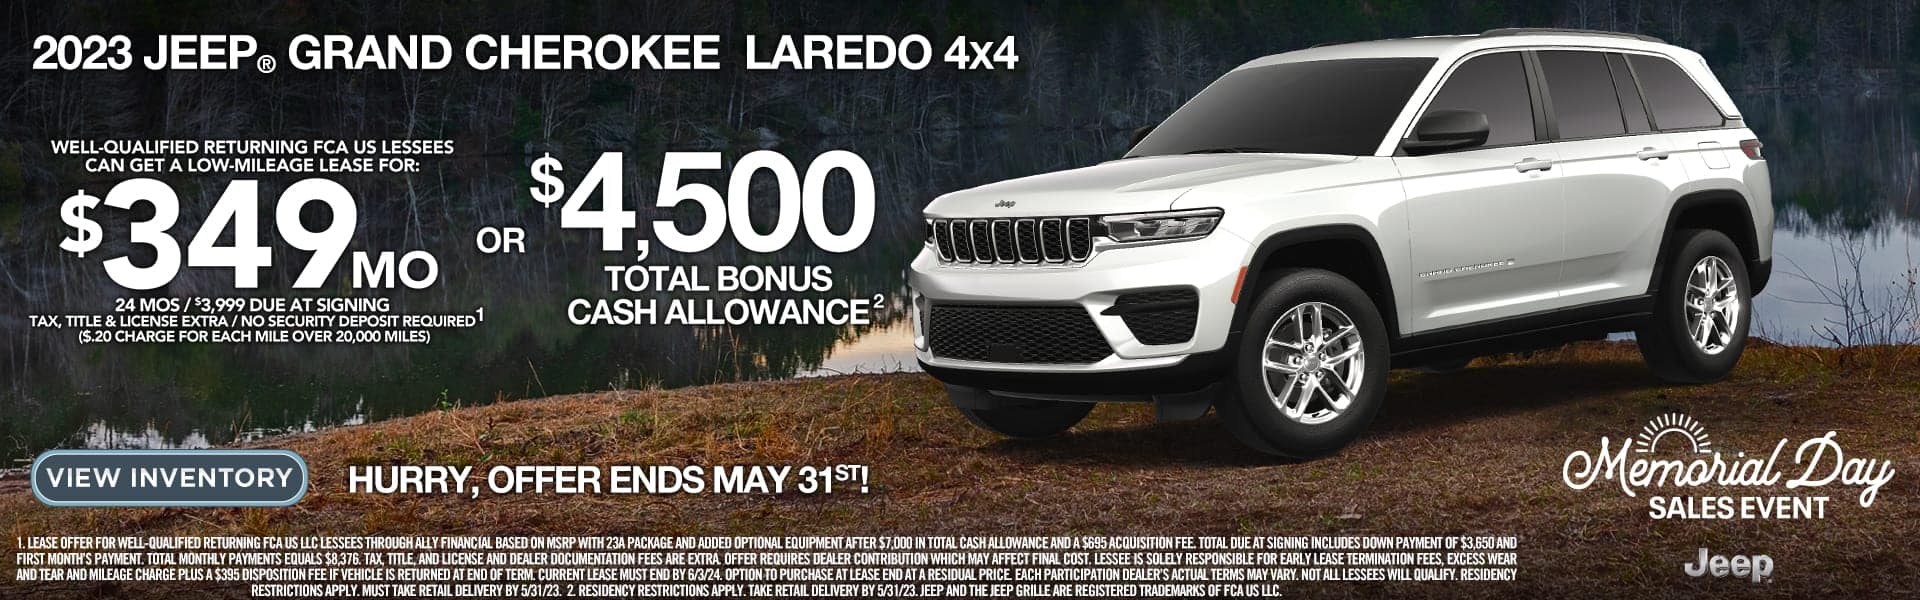 2023 Jeep Grand Cherokee lease offer